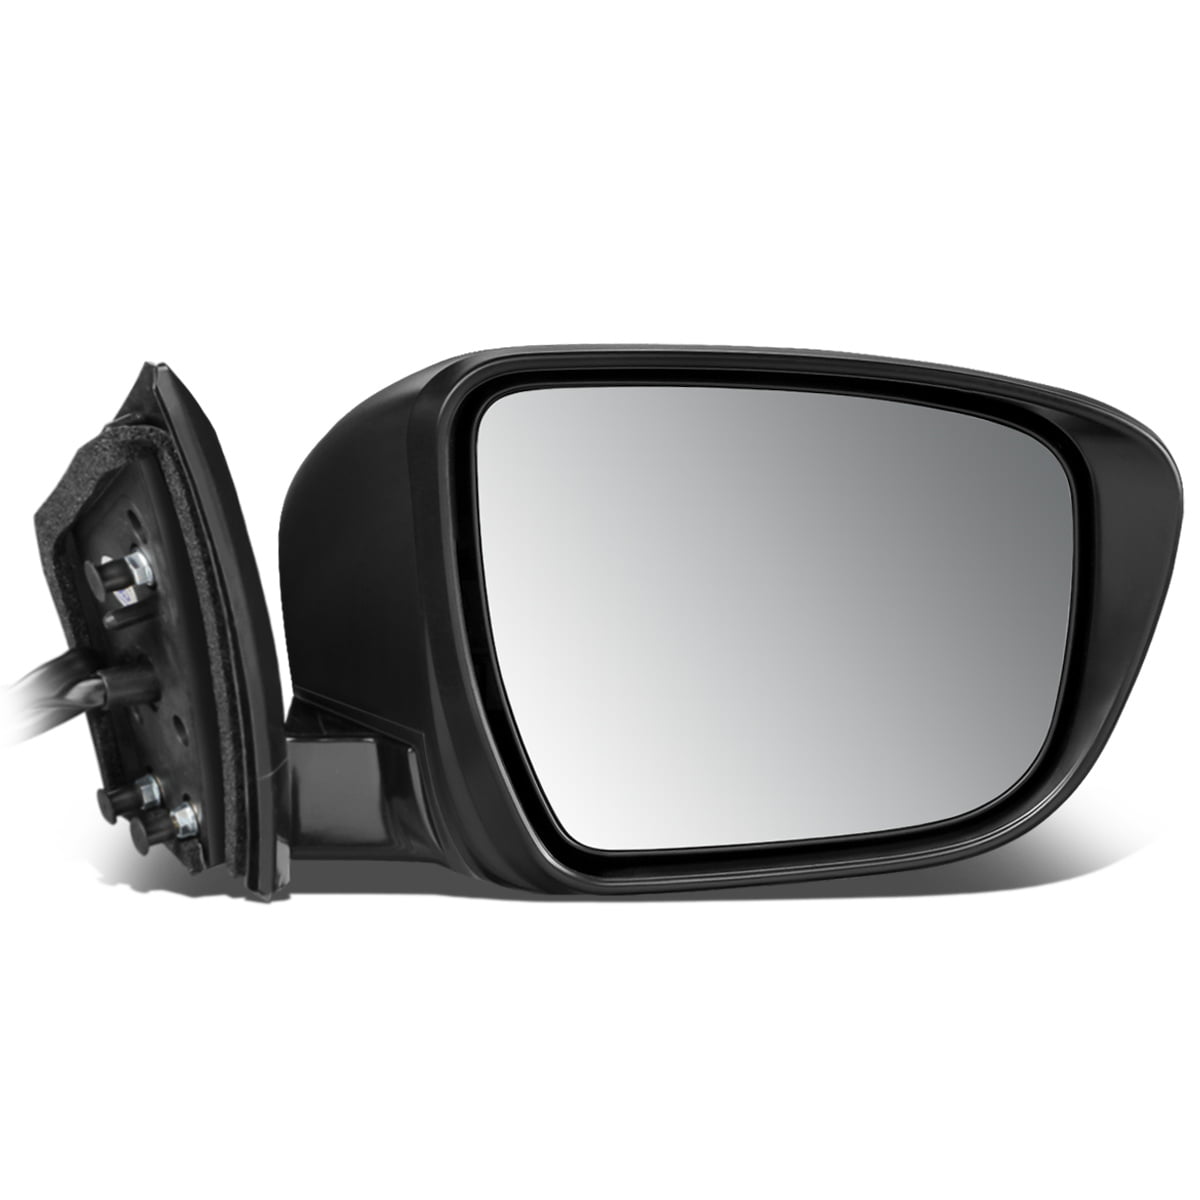 Fit System 90154 Toyota T100 Passenger Side Replacement Mirror Glass 